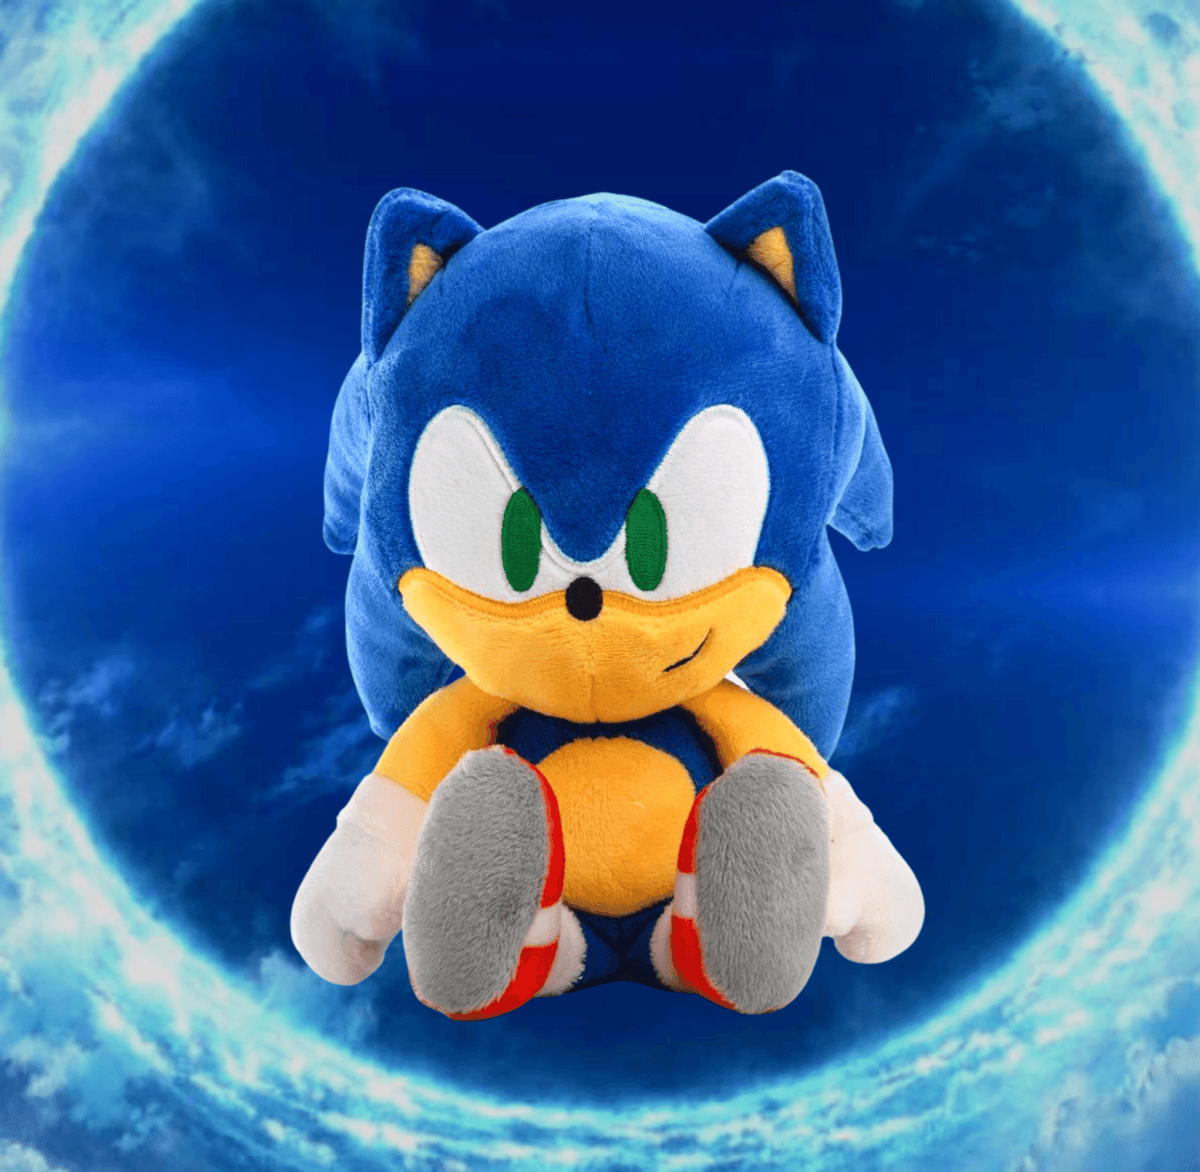 Kidrobot 8 inches Sonic The Hedgehog Plush Toy for sale online 